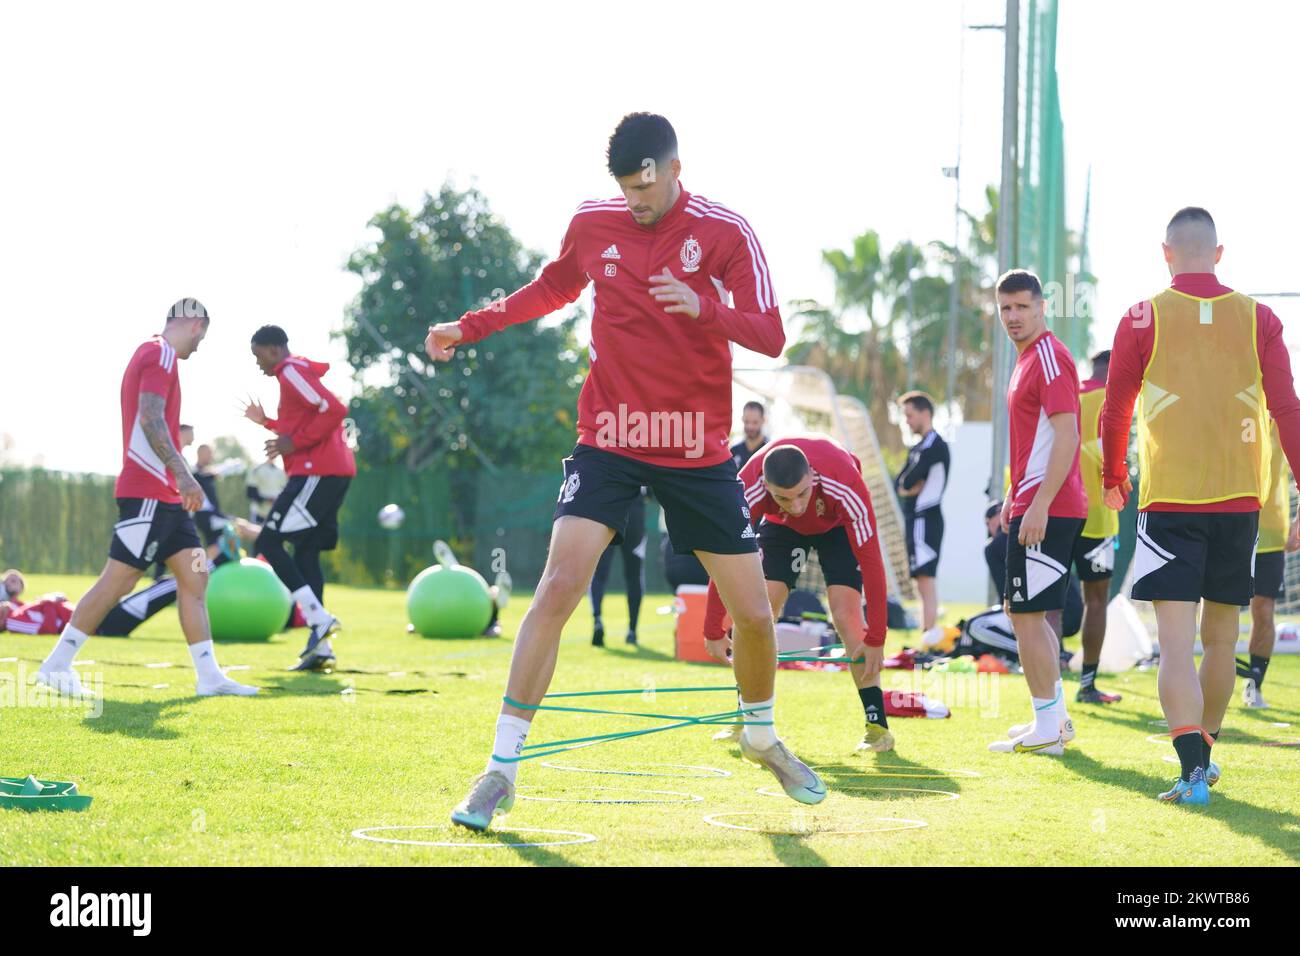 Marbella, Spain, Wednesday 30 November 2022. Standard's Stipe Perica pictured during a training session at the winter training camp of Belgian first division soccer team Standard de Liege in Marbella, Spain, Wednesday 30 November 2022. BELGA PHOTO JOMA GARCIA I GISBERT Stock Photo